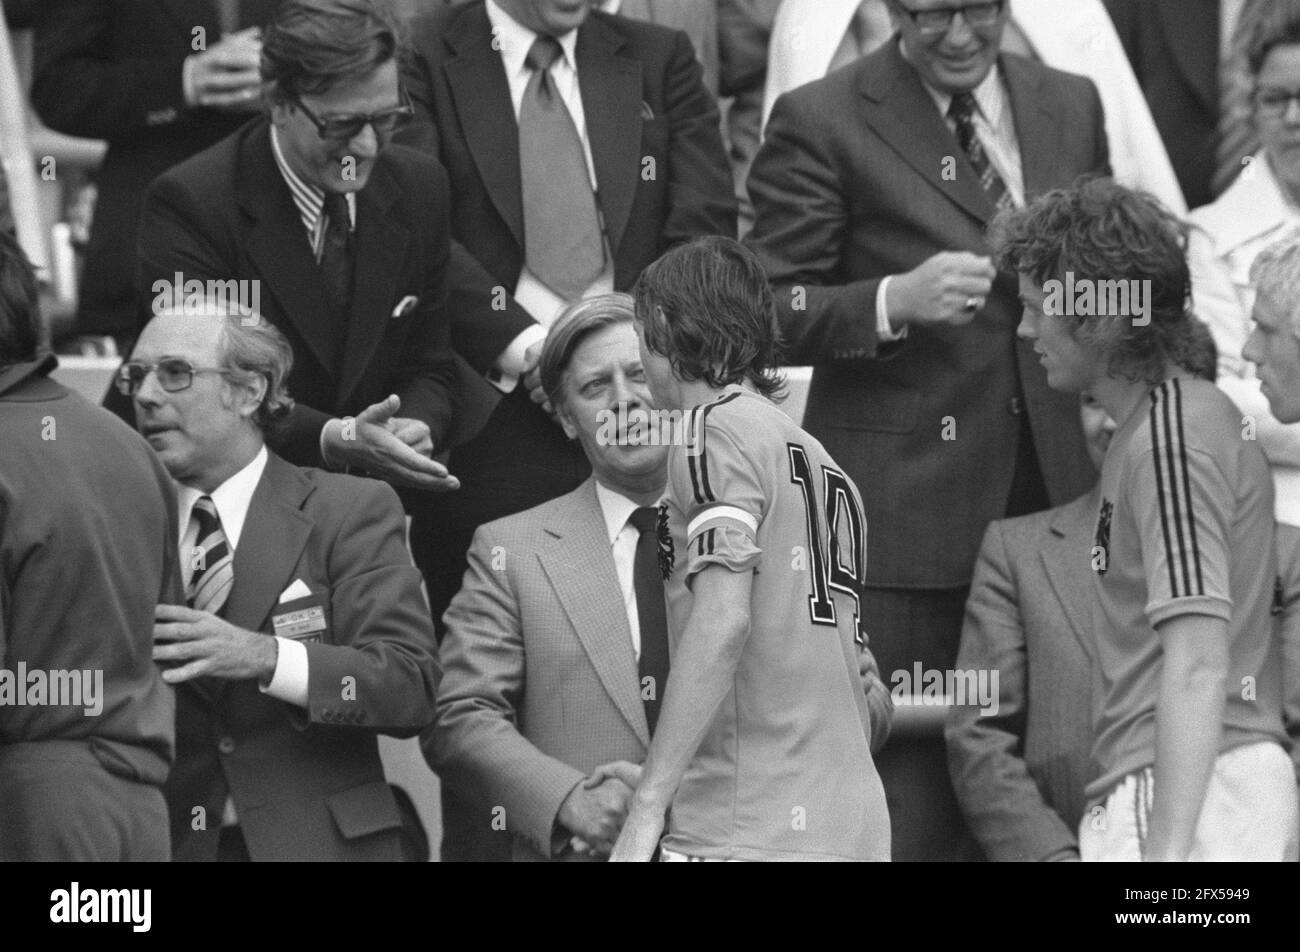 World Cup final 1974 in Munich, West Germany v. Netherlands 2-1; No. 19 Cruijff gives Scheel hand afterward, July 7, 1974, finals, sports, soccer, world championships, The Netherlands, 20th century press agency photo, news to remember, documentary, historic photography 1945-1990, visual stories, human history of the Twentieth Century, capturing moments in time Stock Photo